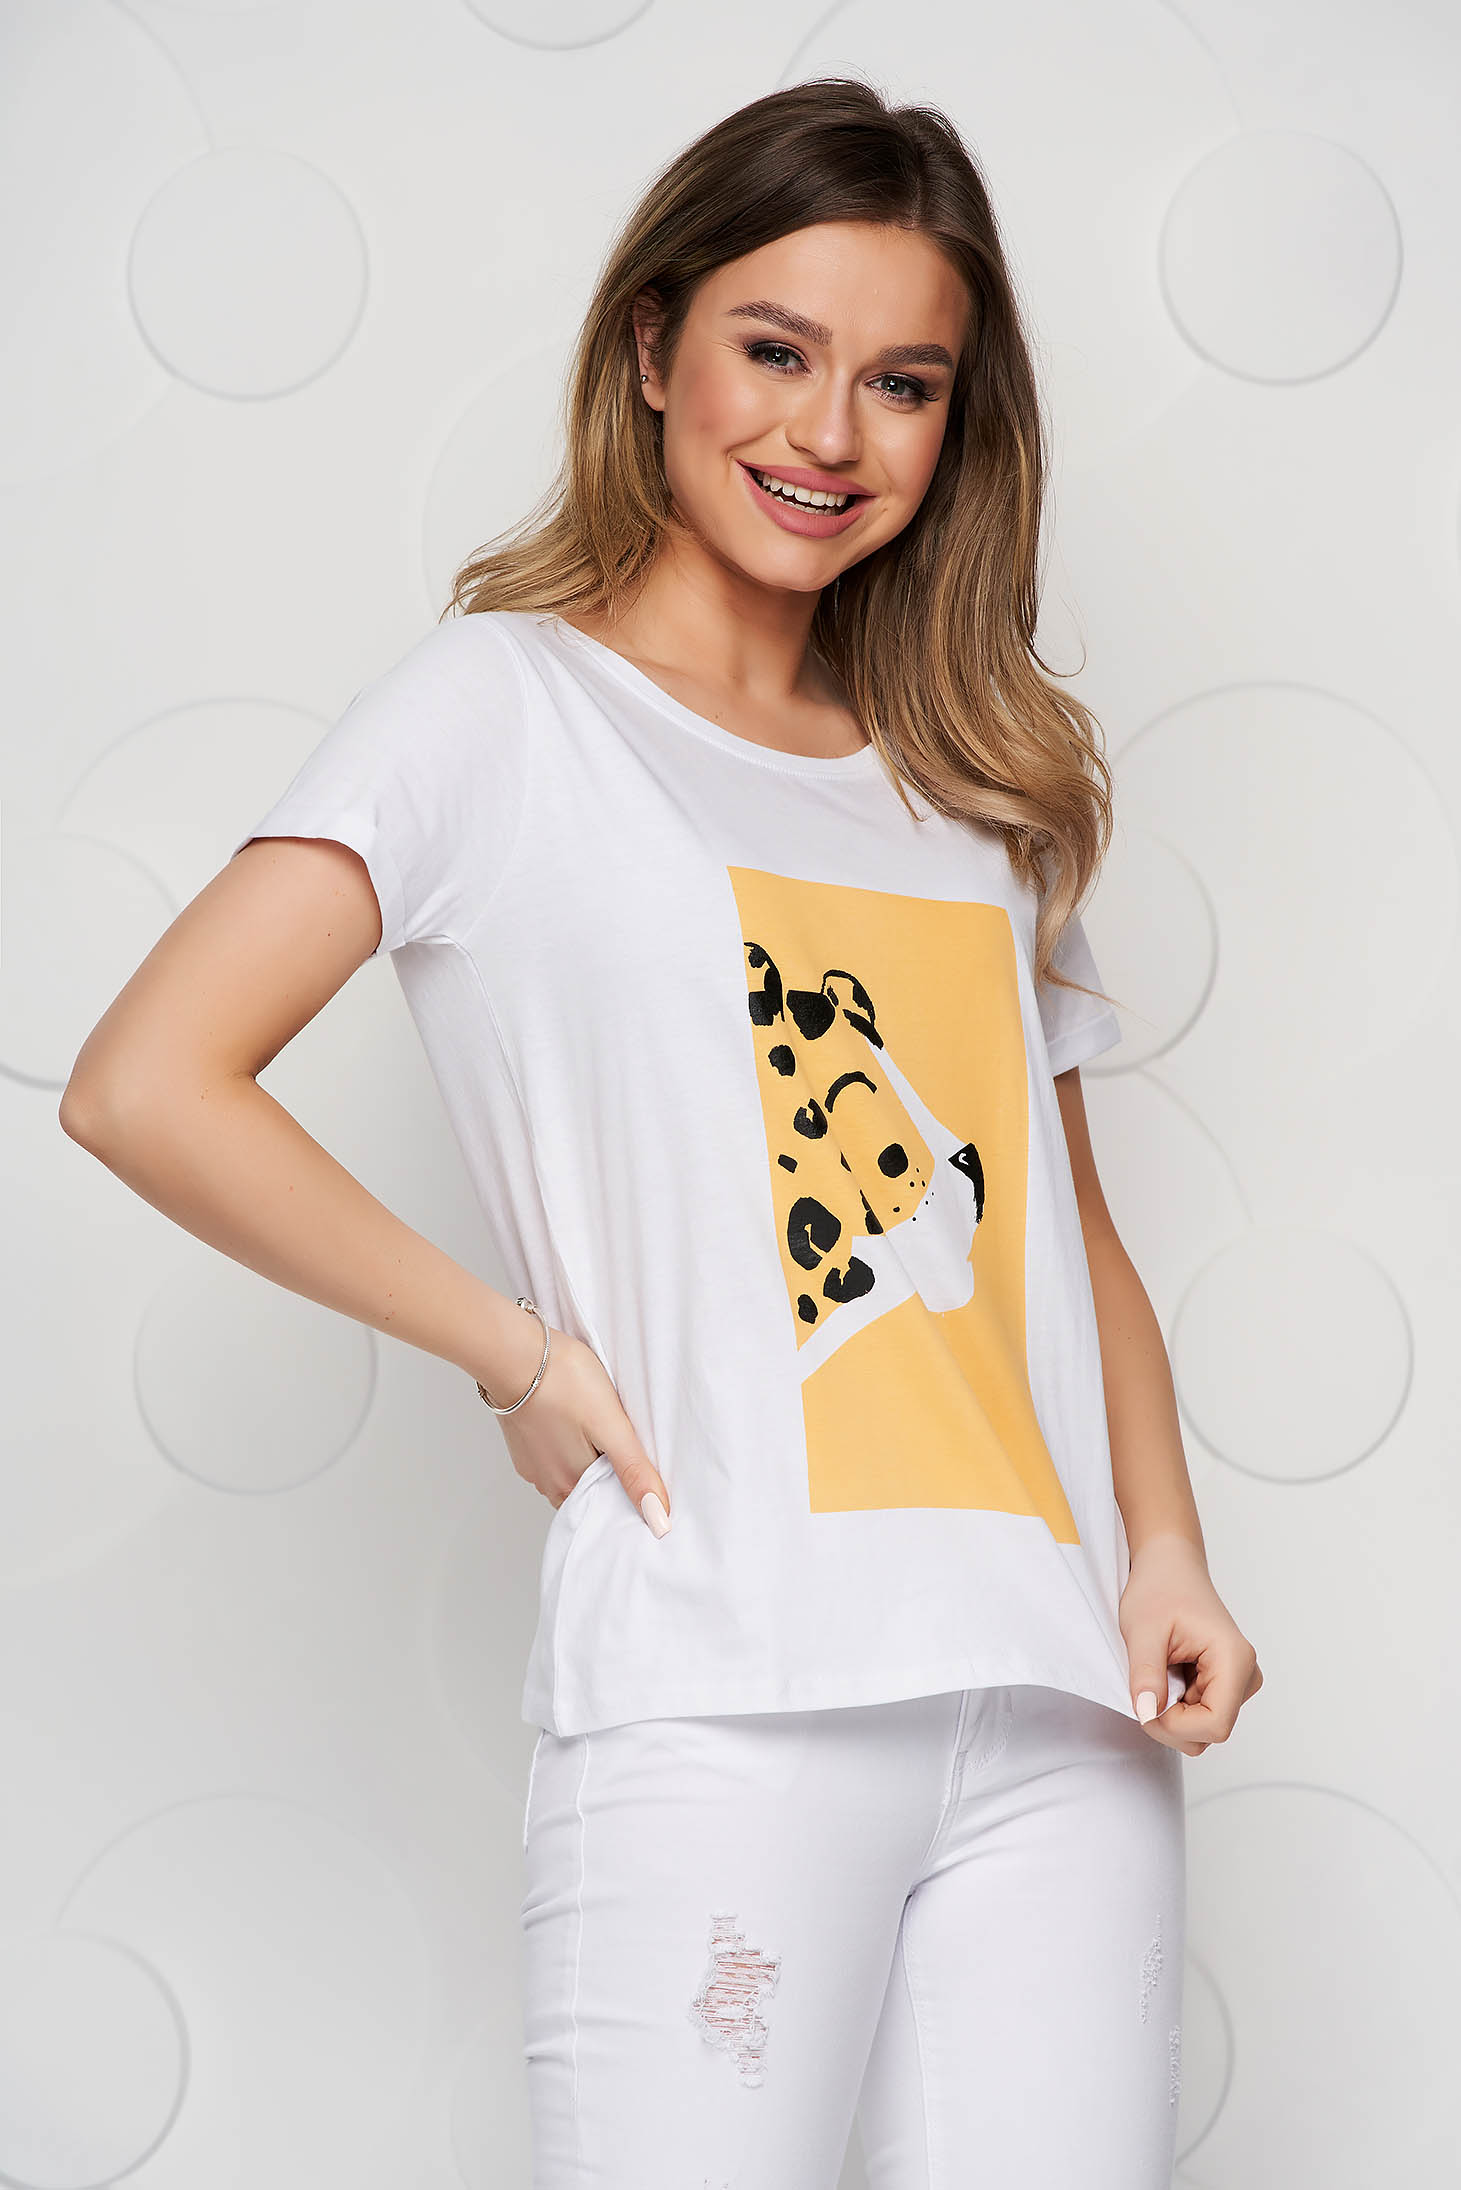 White t-shirt loose fit cotton with rounded cleavage